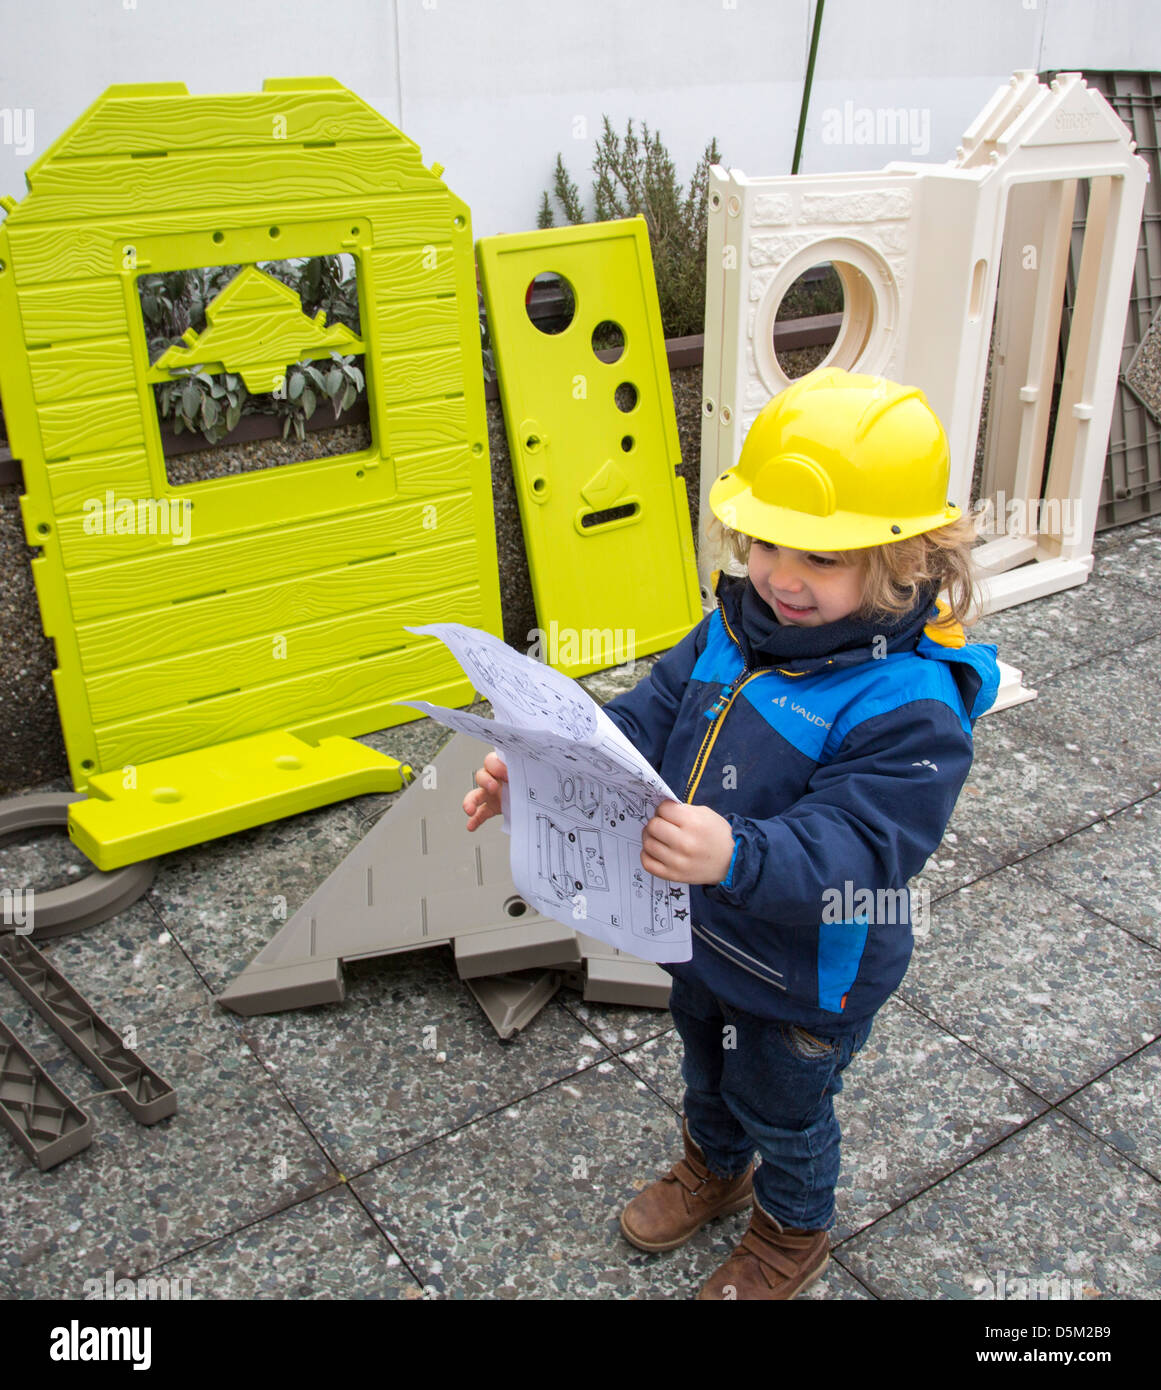 3 years old boy is playing at home. Assembling at toy house, wears a toy hard hat. Looks like an architect. Stock Photo